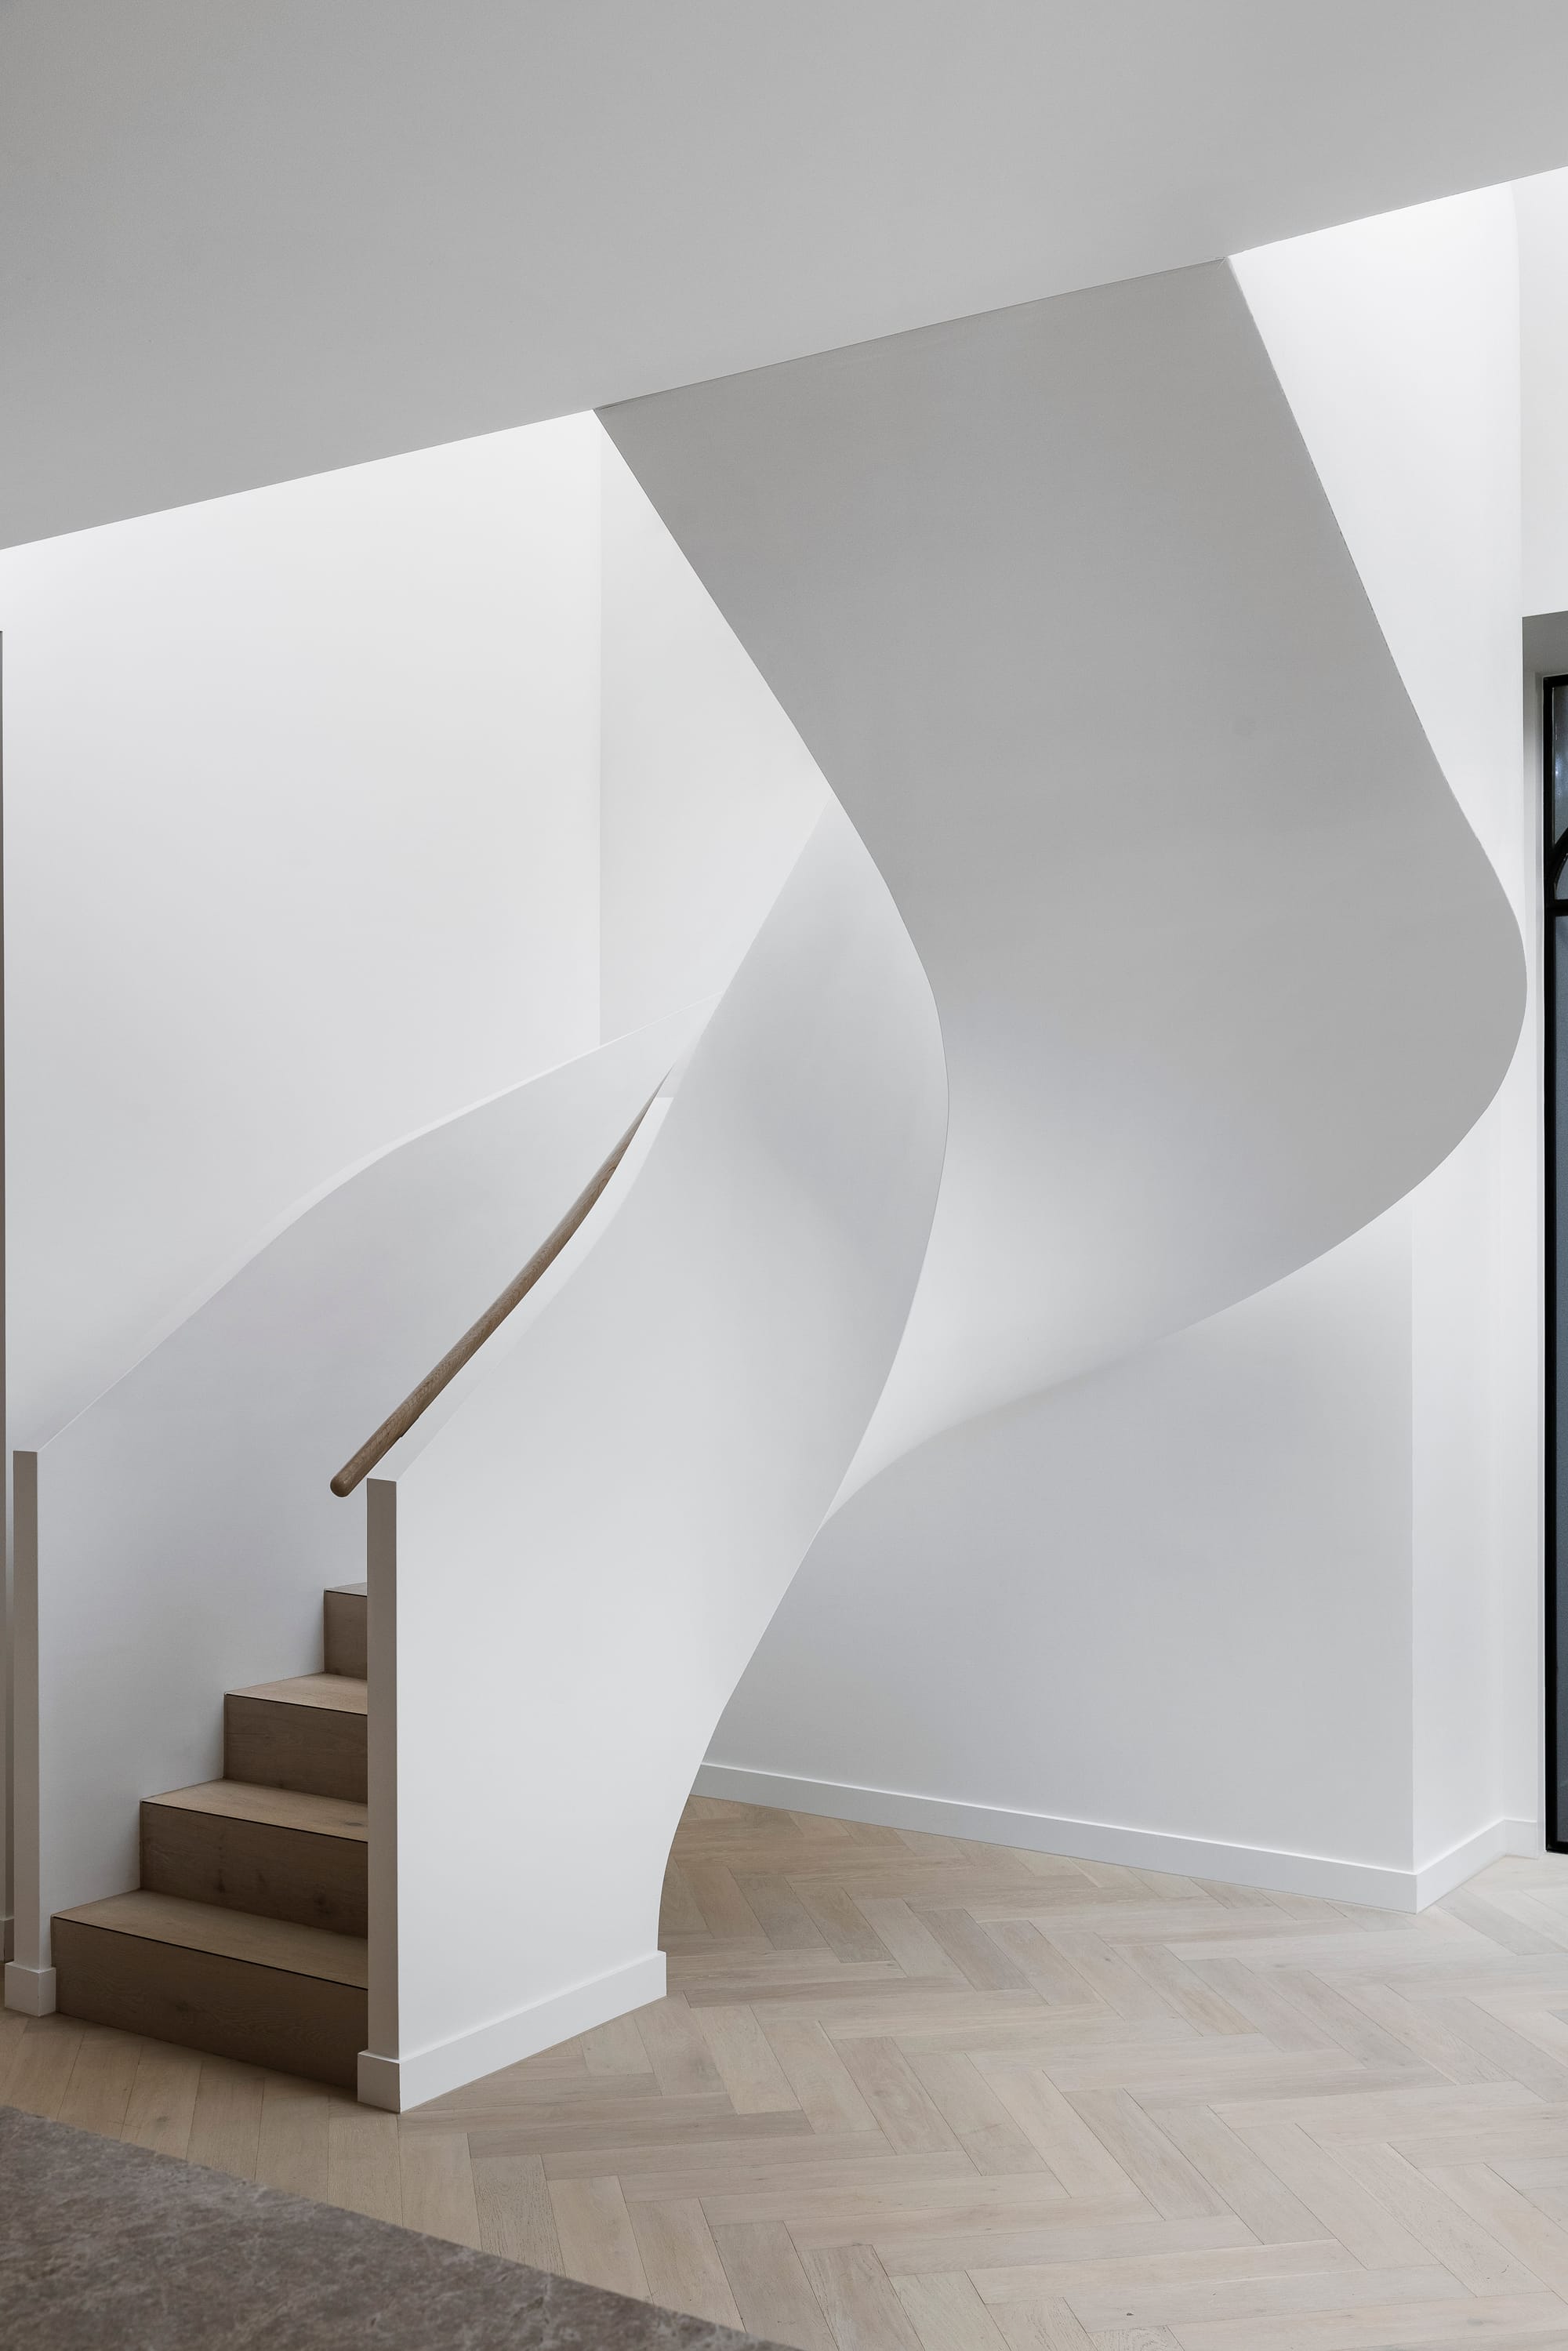 Goldsmith Residence by C.Kairouz Architects. Photography by Spacecraft. Curved white contemporary staircase with timber steps and balustrade. Pale timber herringbone floors. 